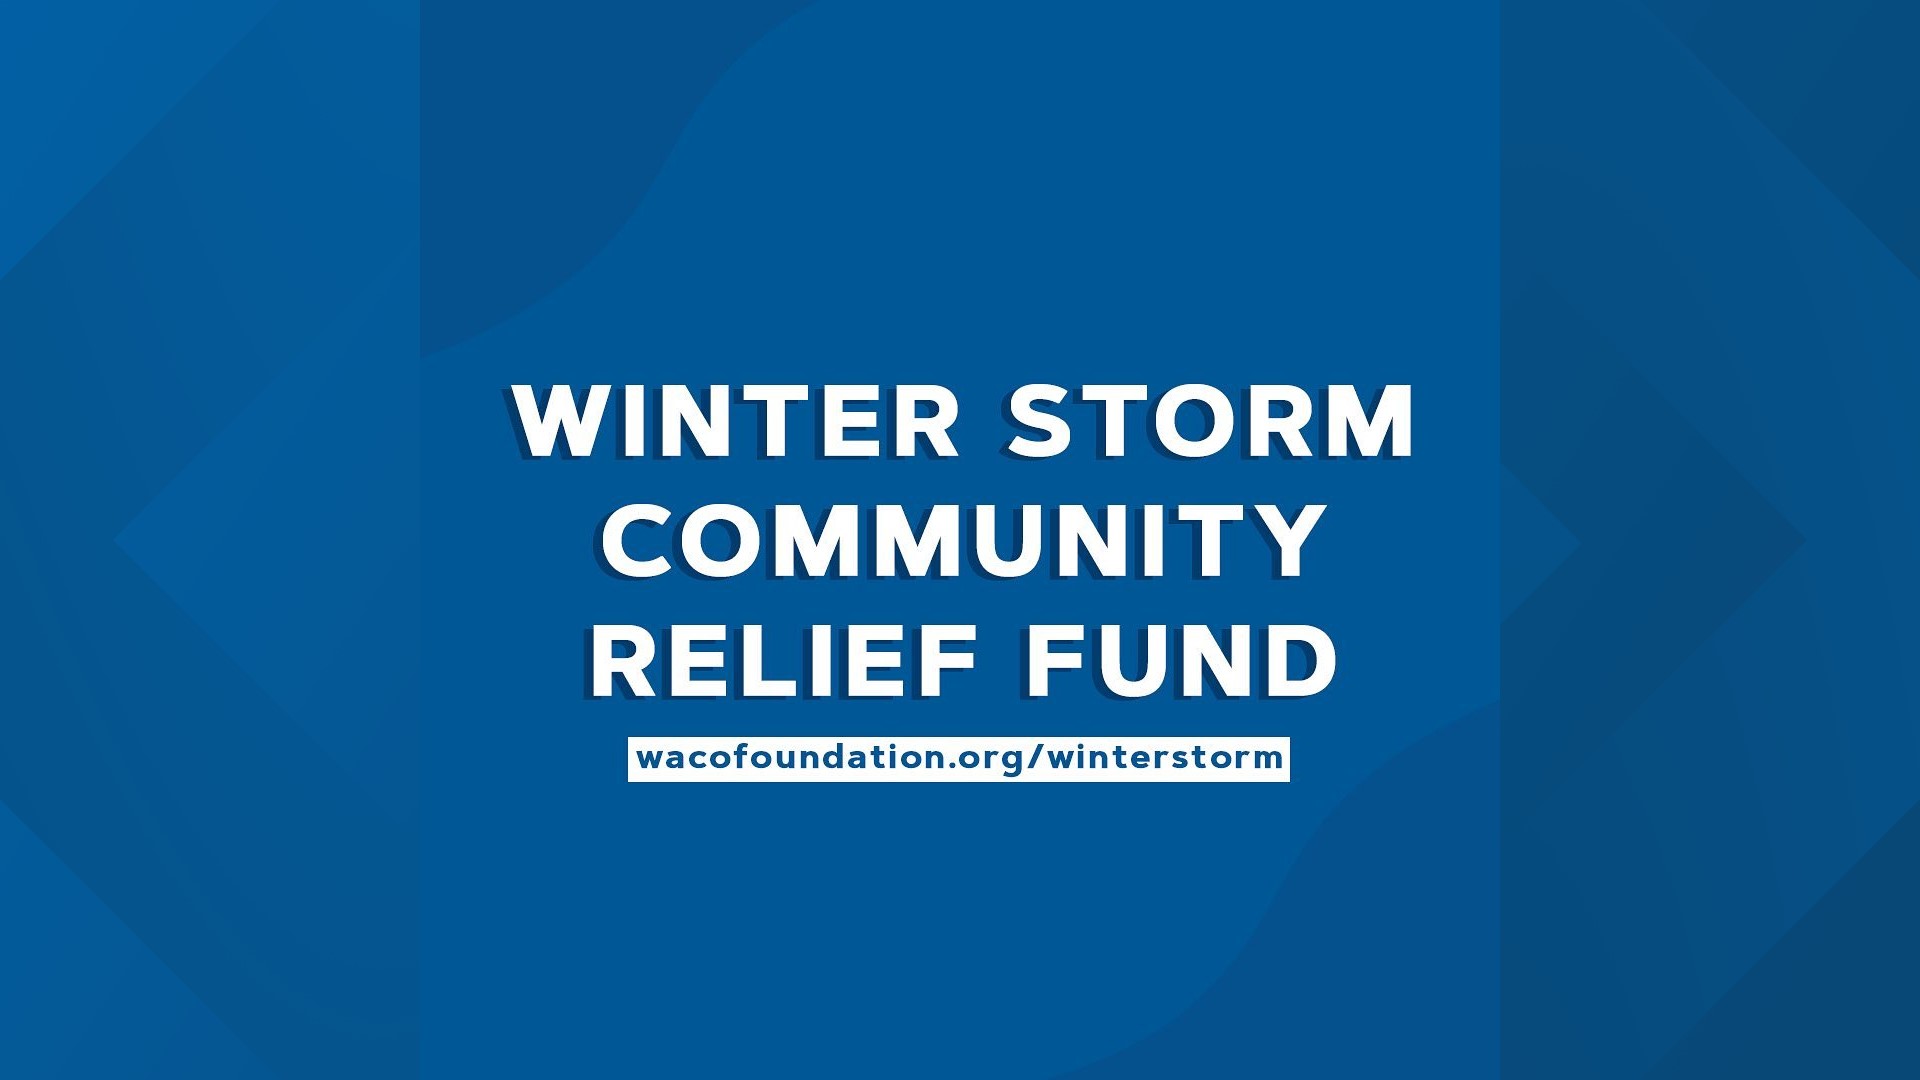 Then the funds will be distributed to local nonprofits across McLennan County that provide assistance for families who've been heavily impacted by the storm.